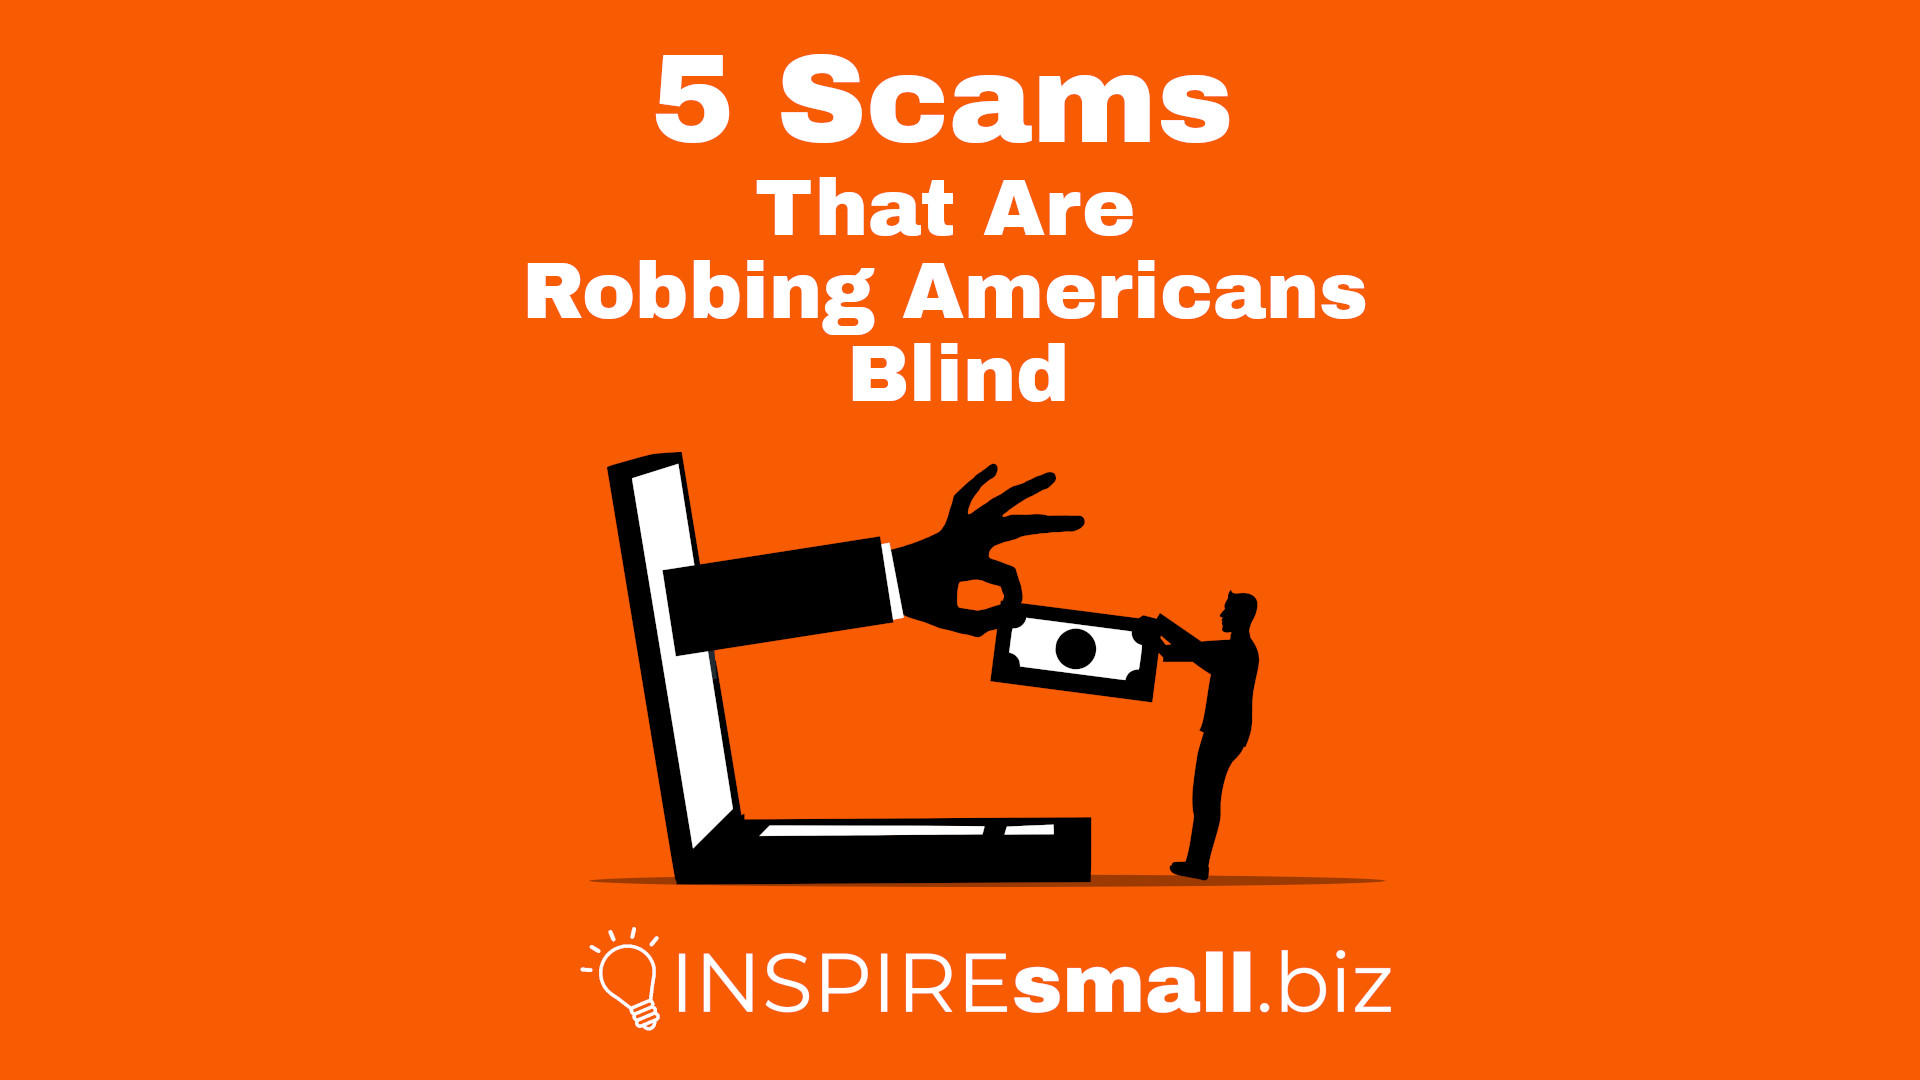 5 Scams That Are Robbing Americans Blind